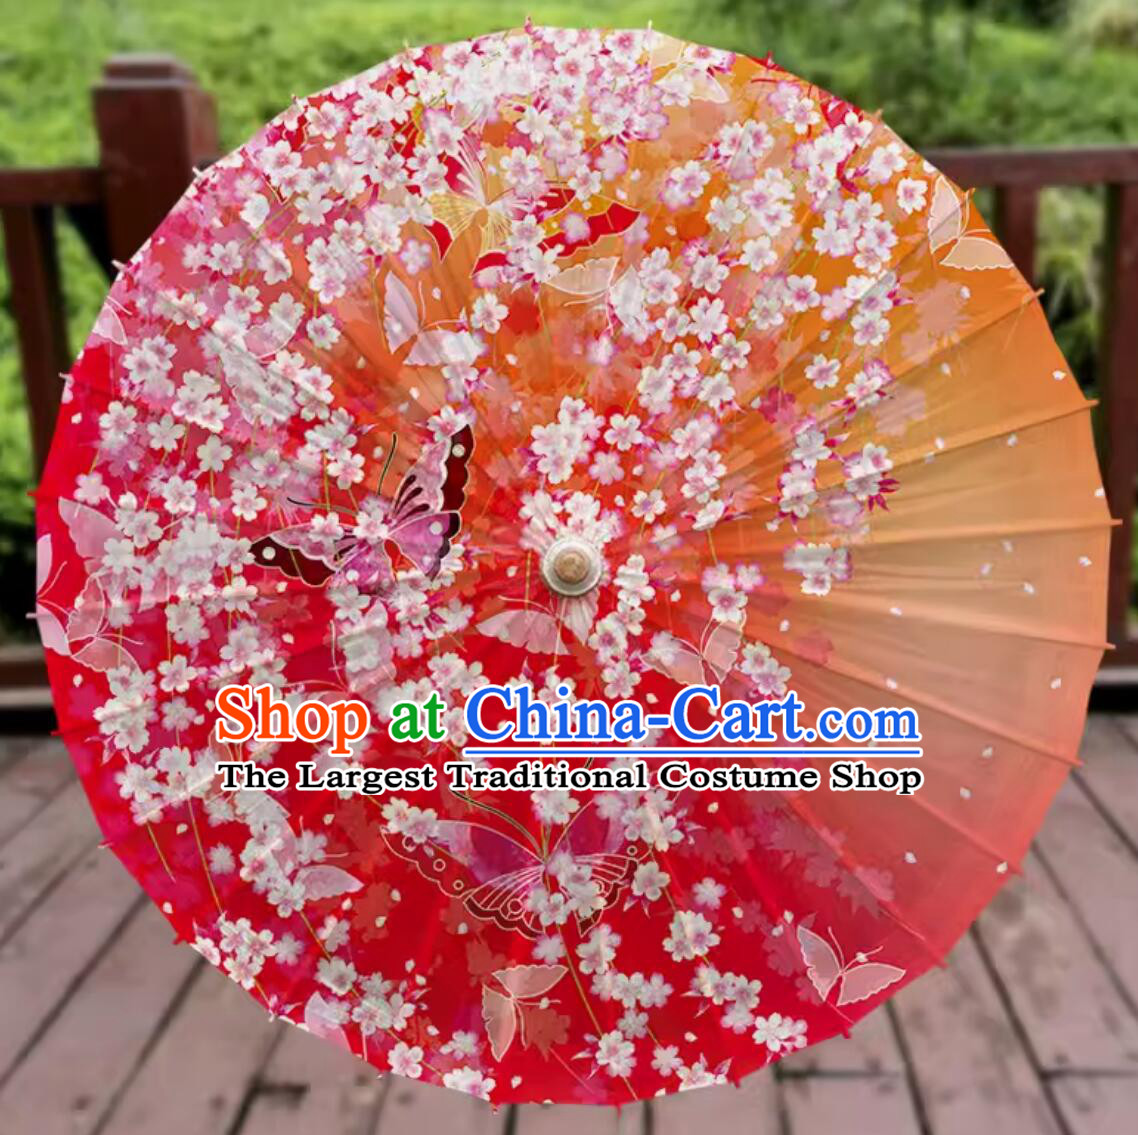 Chinese Painted Butterfly Oil-paper Umbrella Handmade Red Umbrella Traditional Dance Umbrella